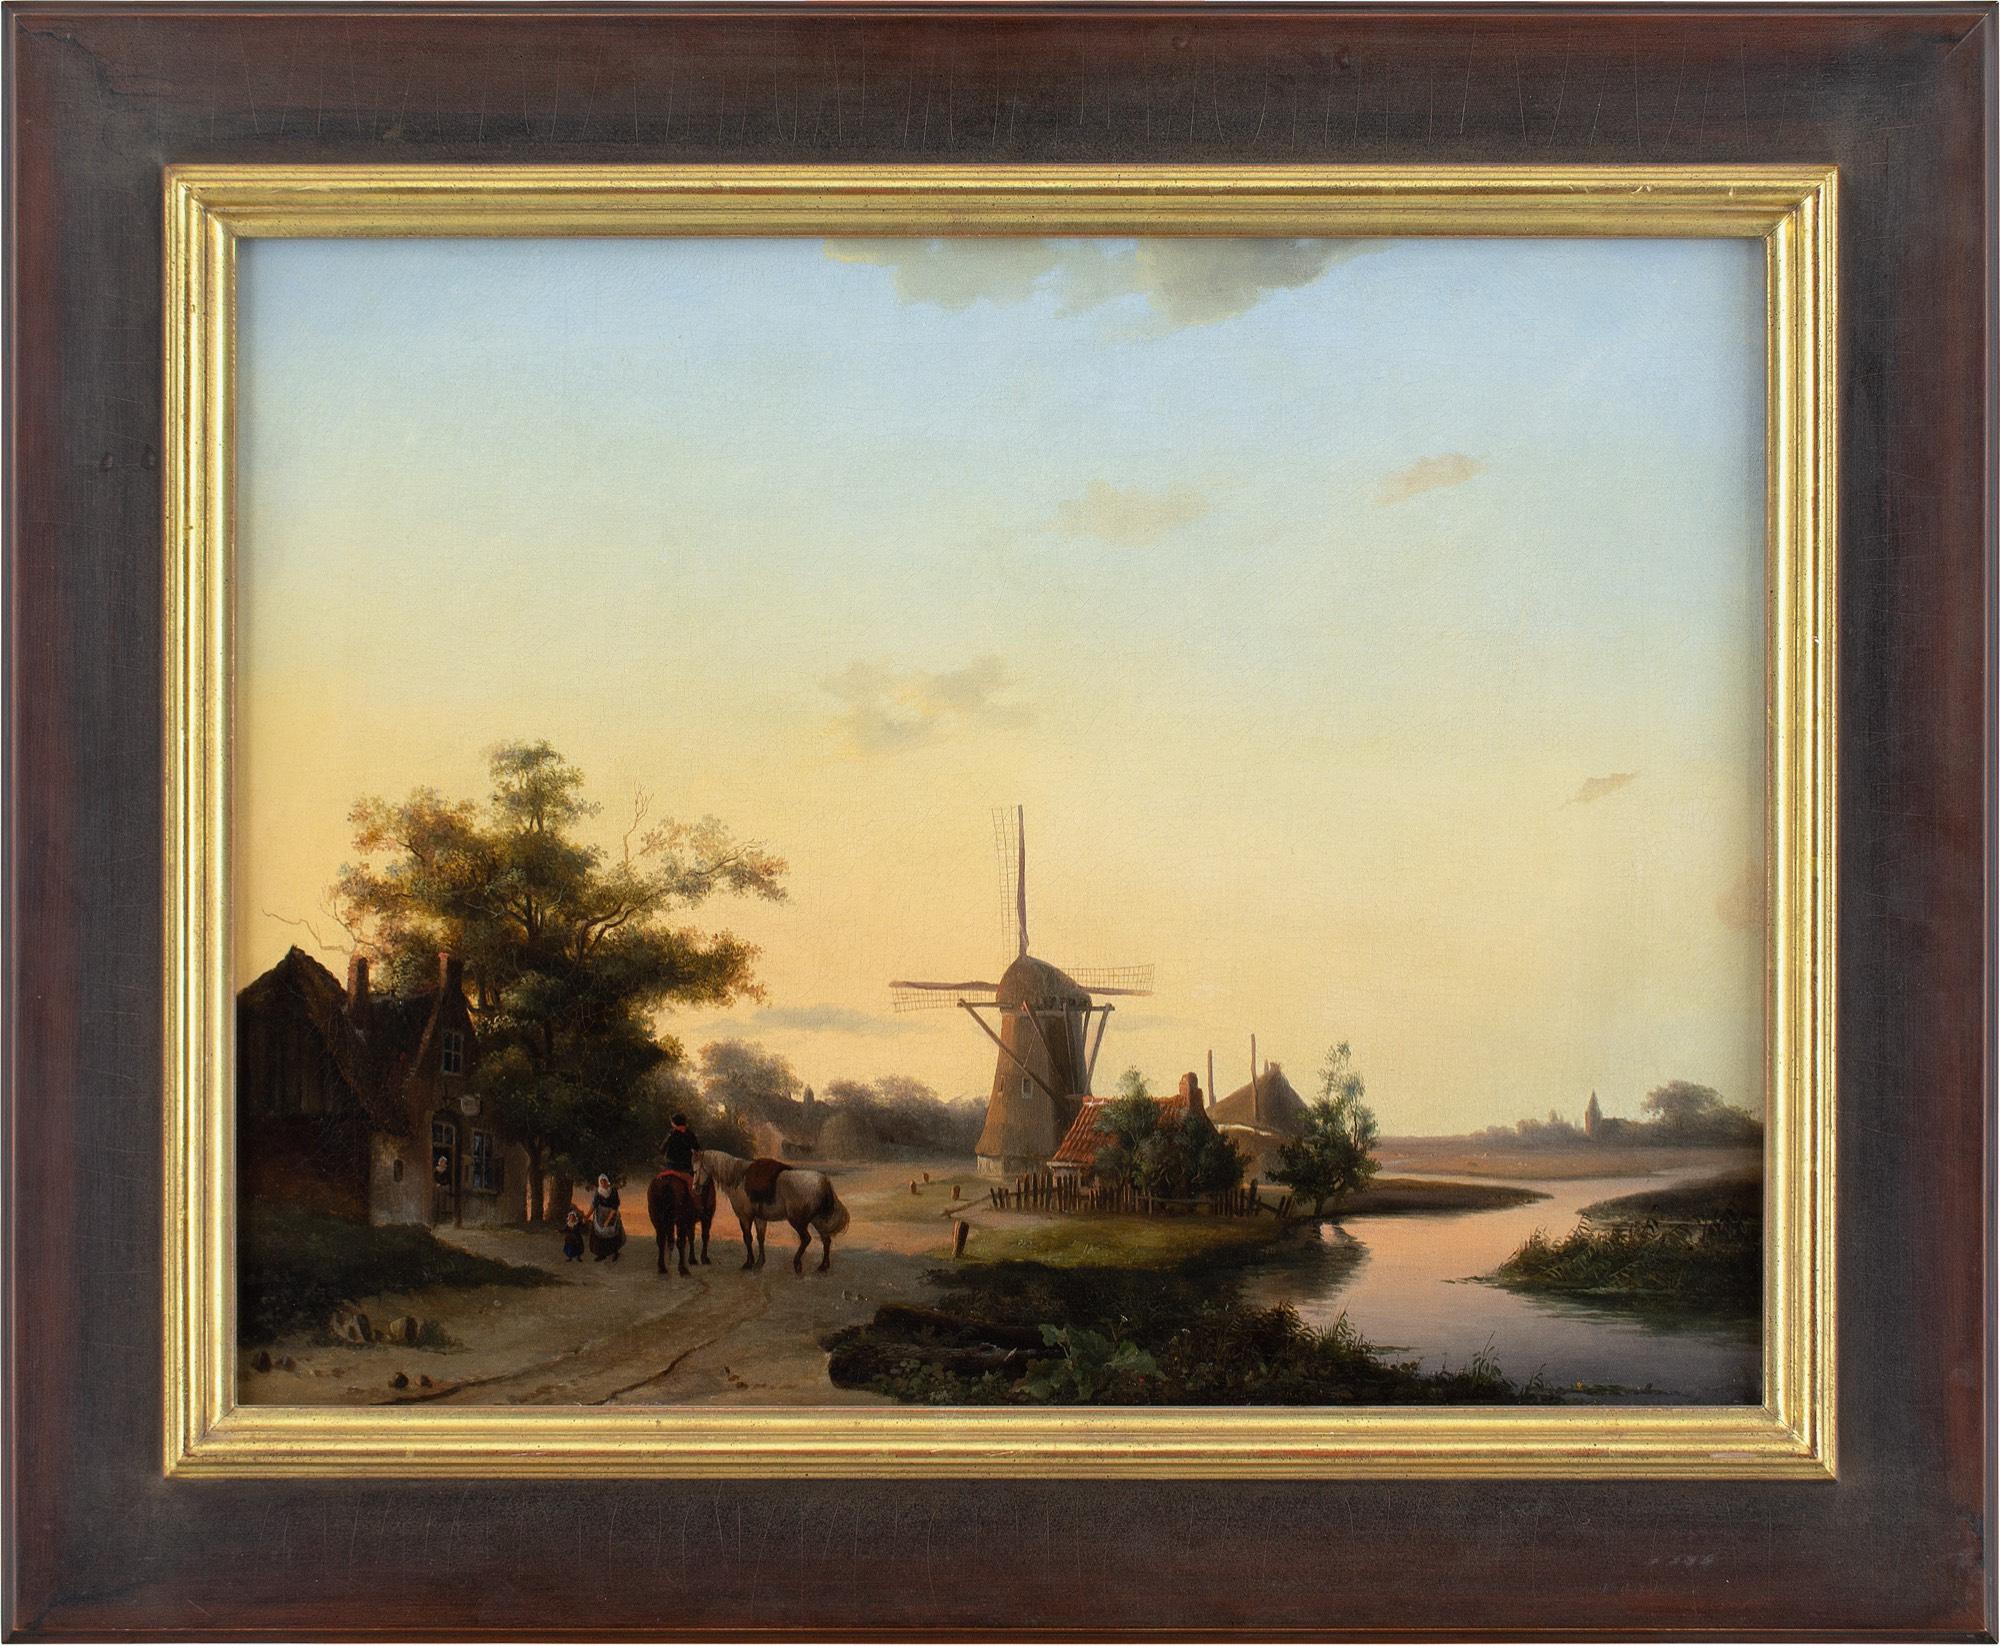 Unknown Landscape Painting - 19th-Century Dutch School, River Landscape With Inn & Windmill